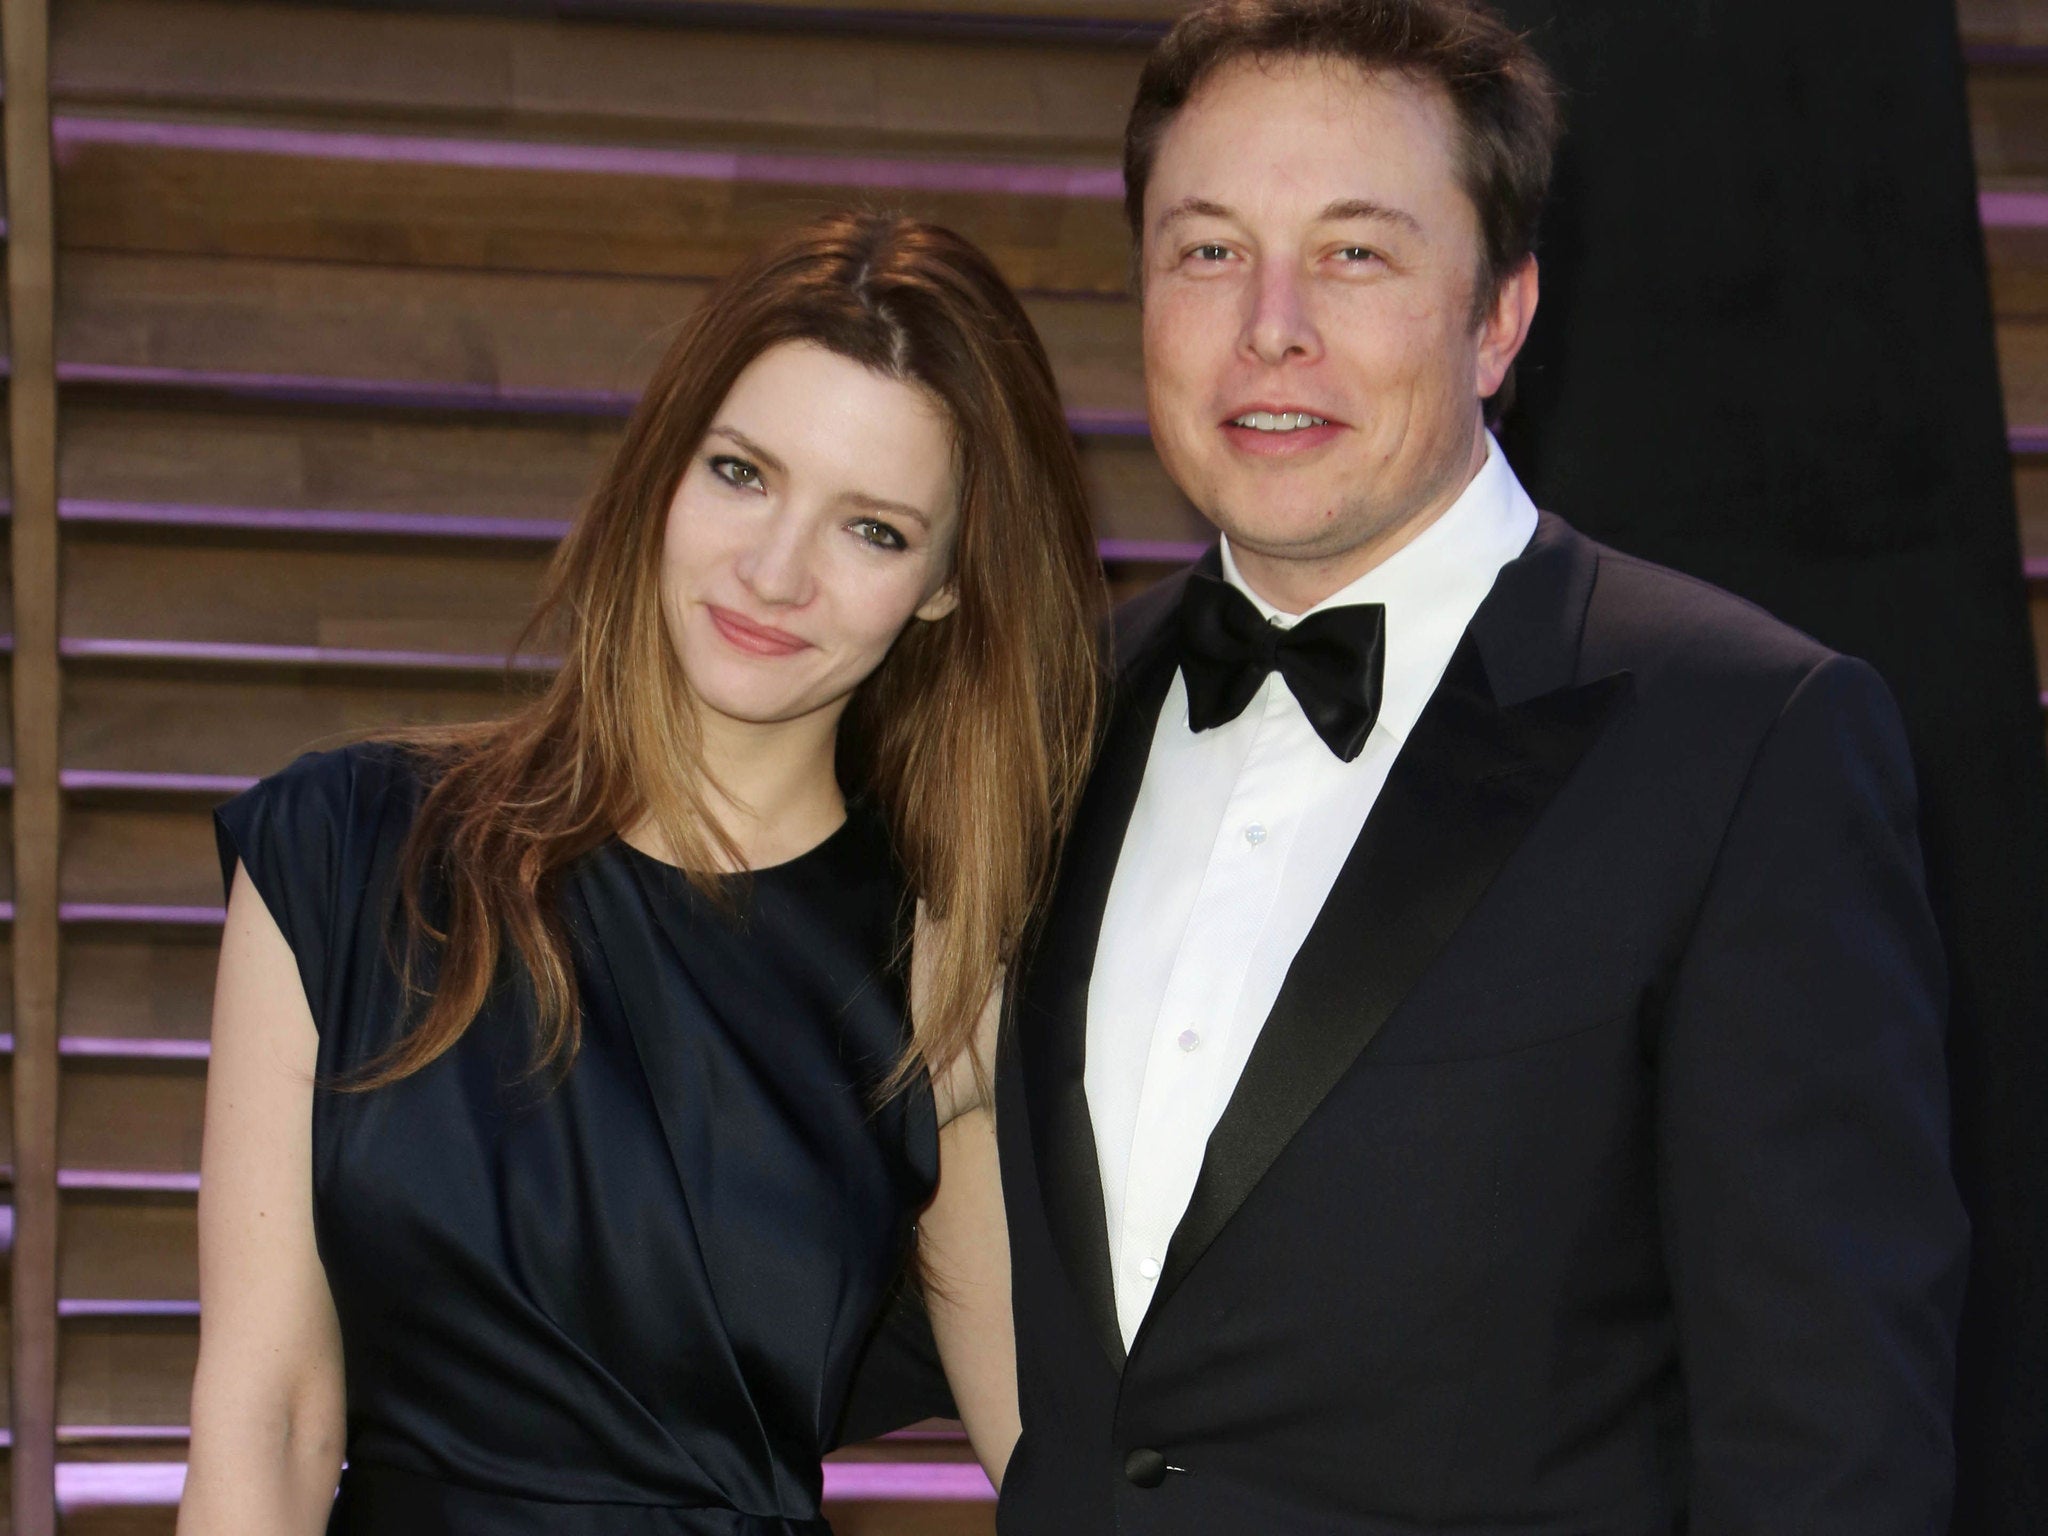 Meet All Elon Musk’s Former Wives and Current Girlfriend